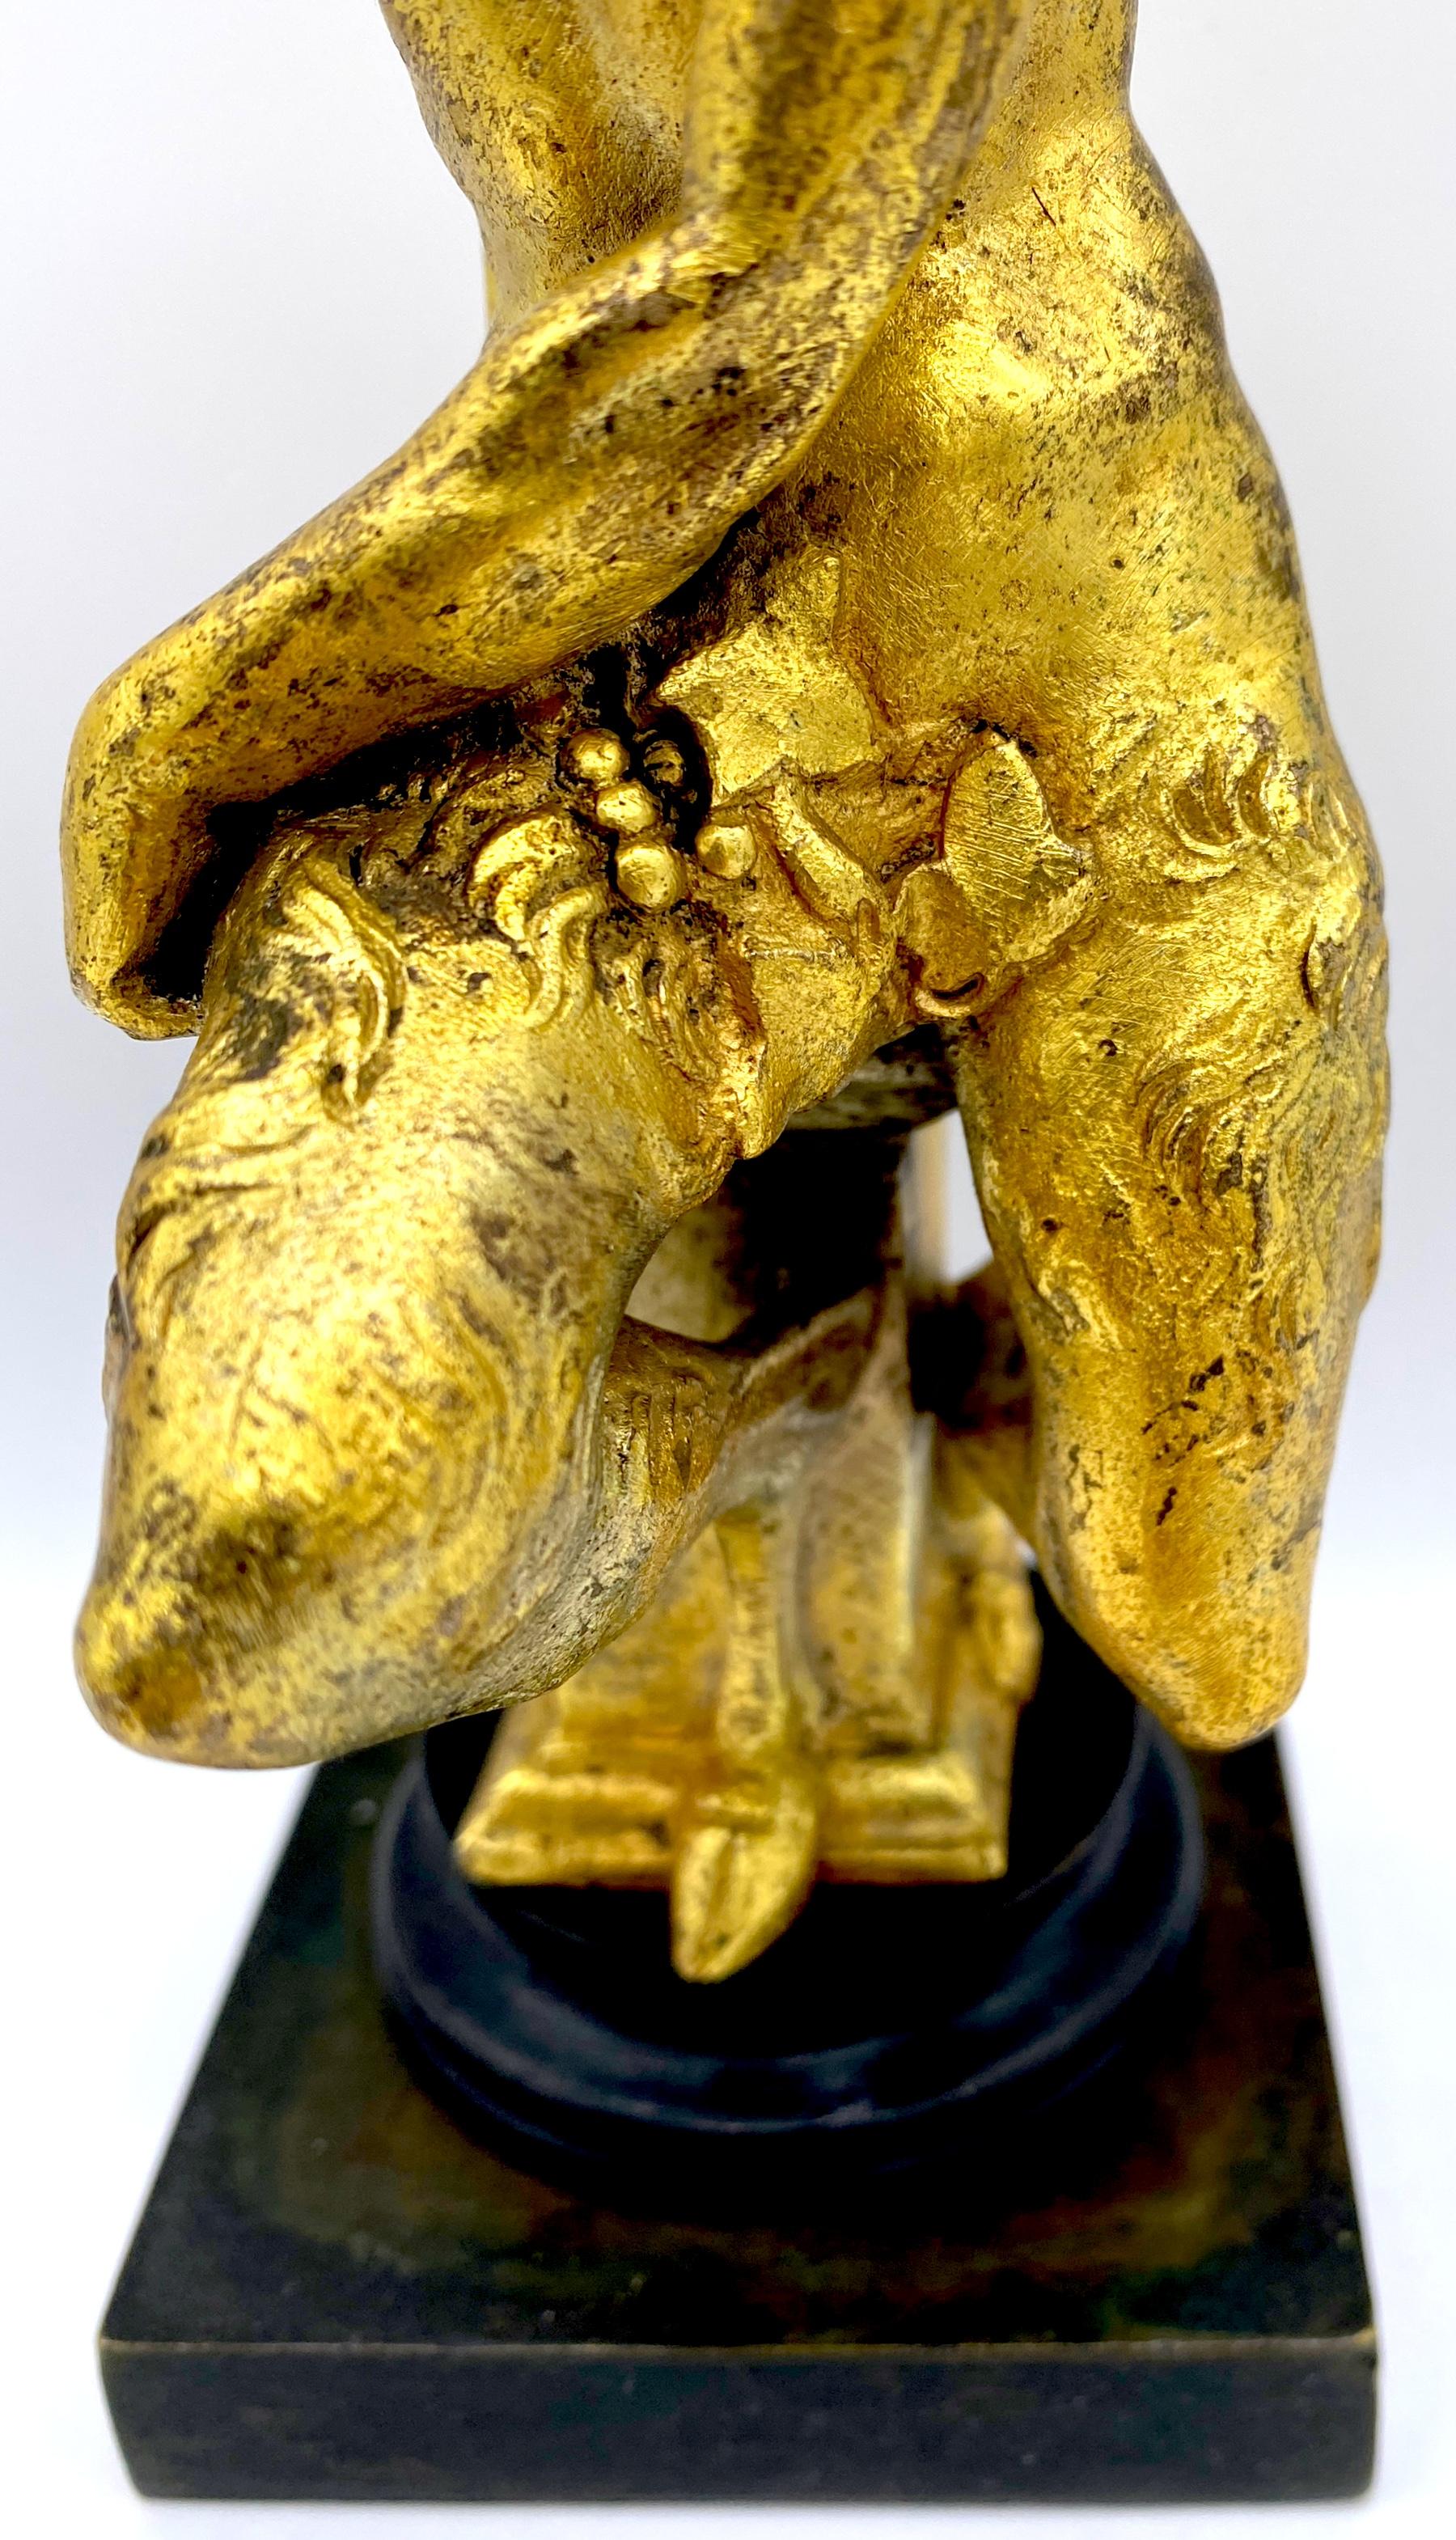 19th Century French Ormolu & Patinated Bronze Sculpture of a Seated Satyr  For Sale 4